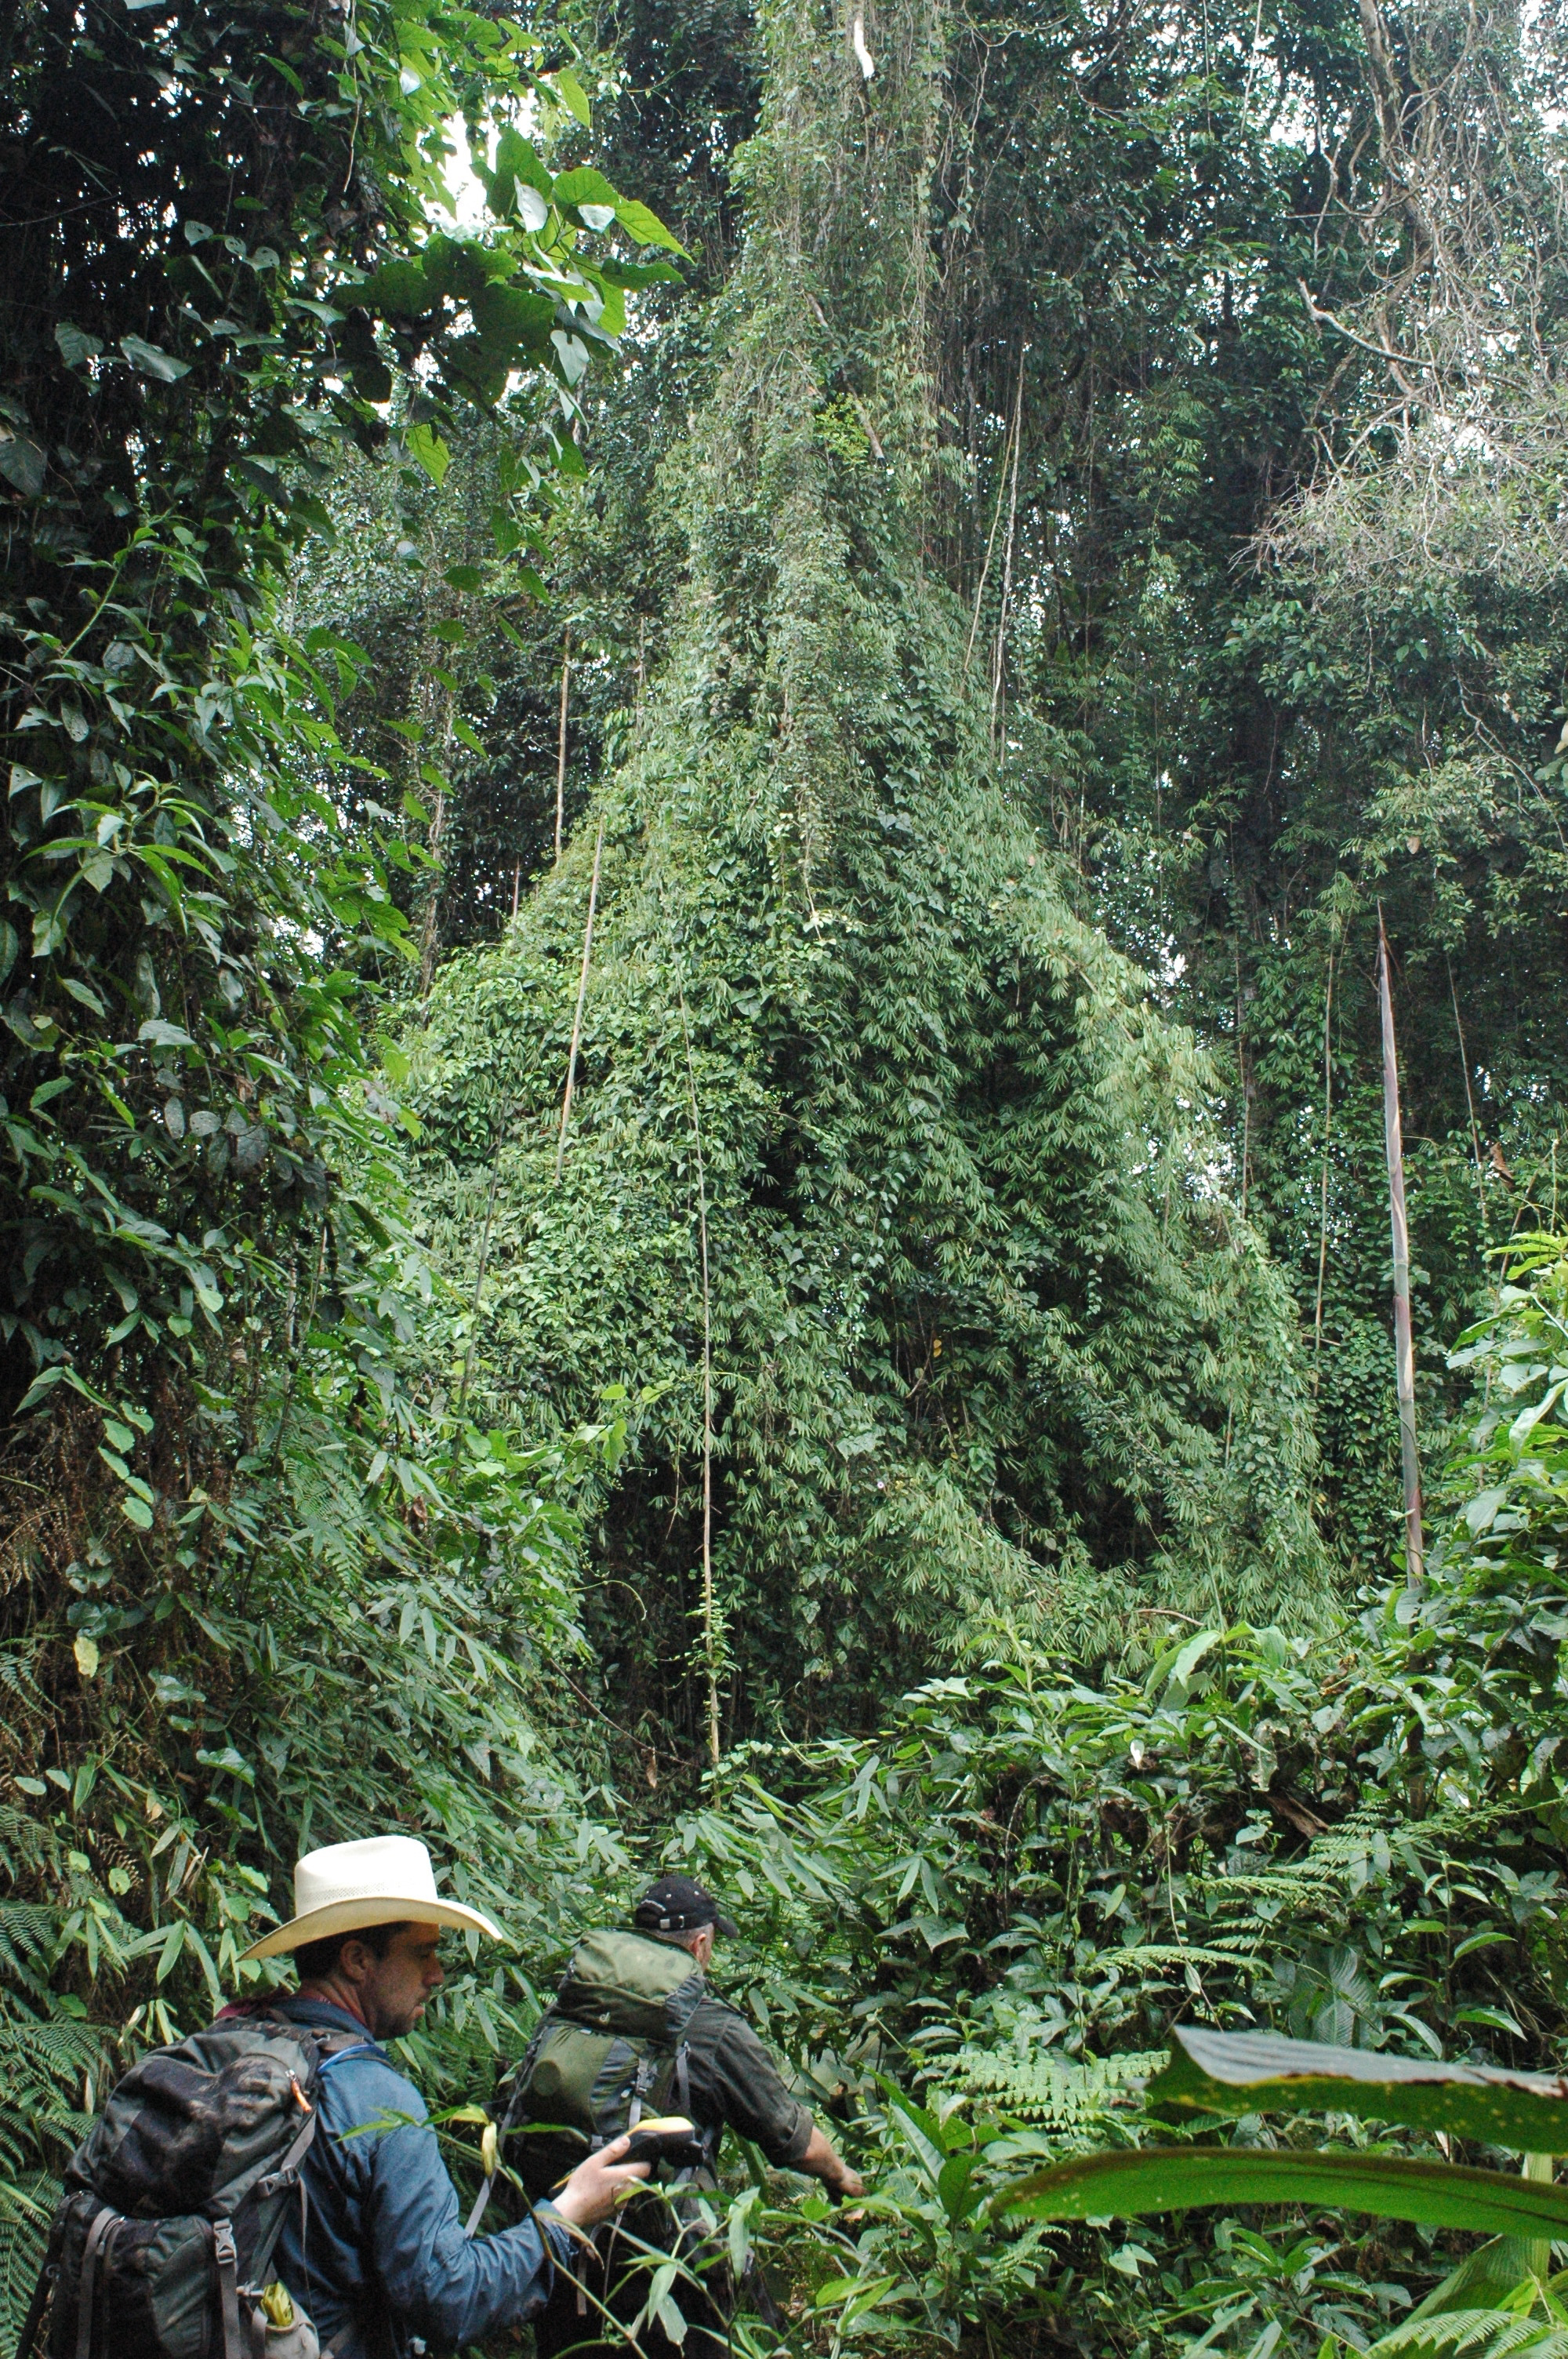 The expedition proceeds into the jungle.